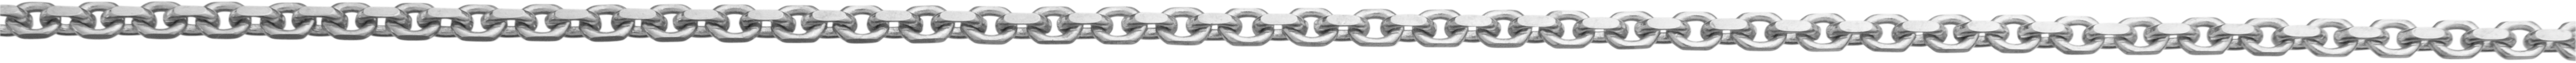 Anchor chain diamond plated silver 925/- 1.60mm, wire thickness 0.50mm